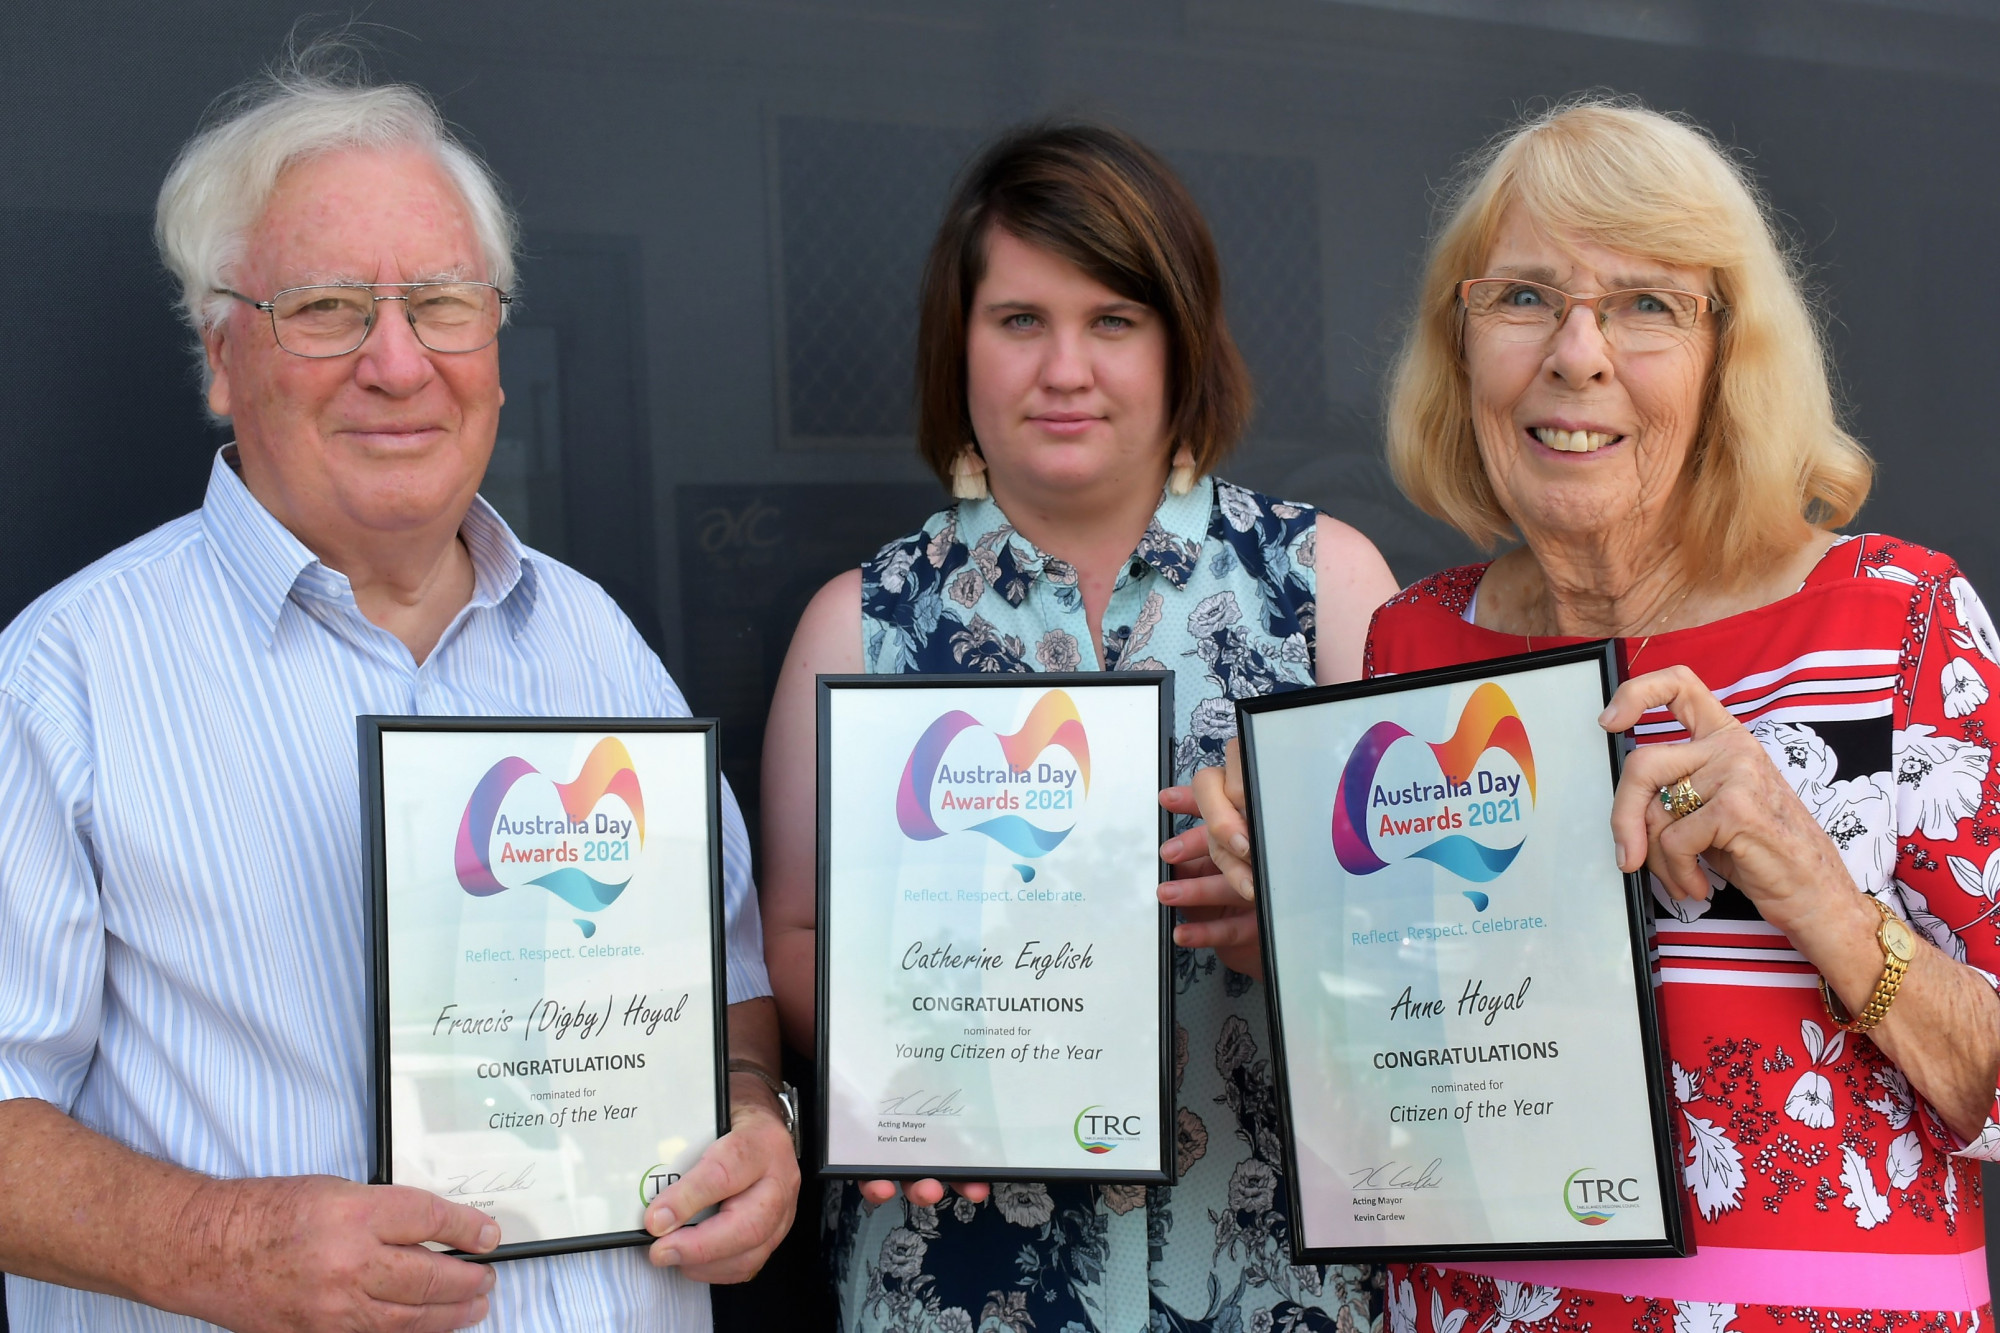 Citizen’s of the Year Digby and Anne Hoyal with Young Citizen of the Year Catherine English